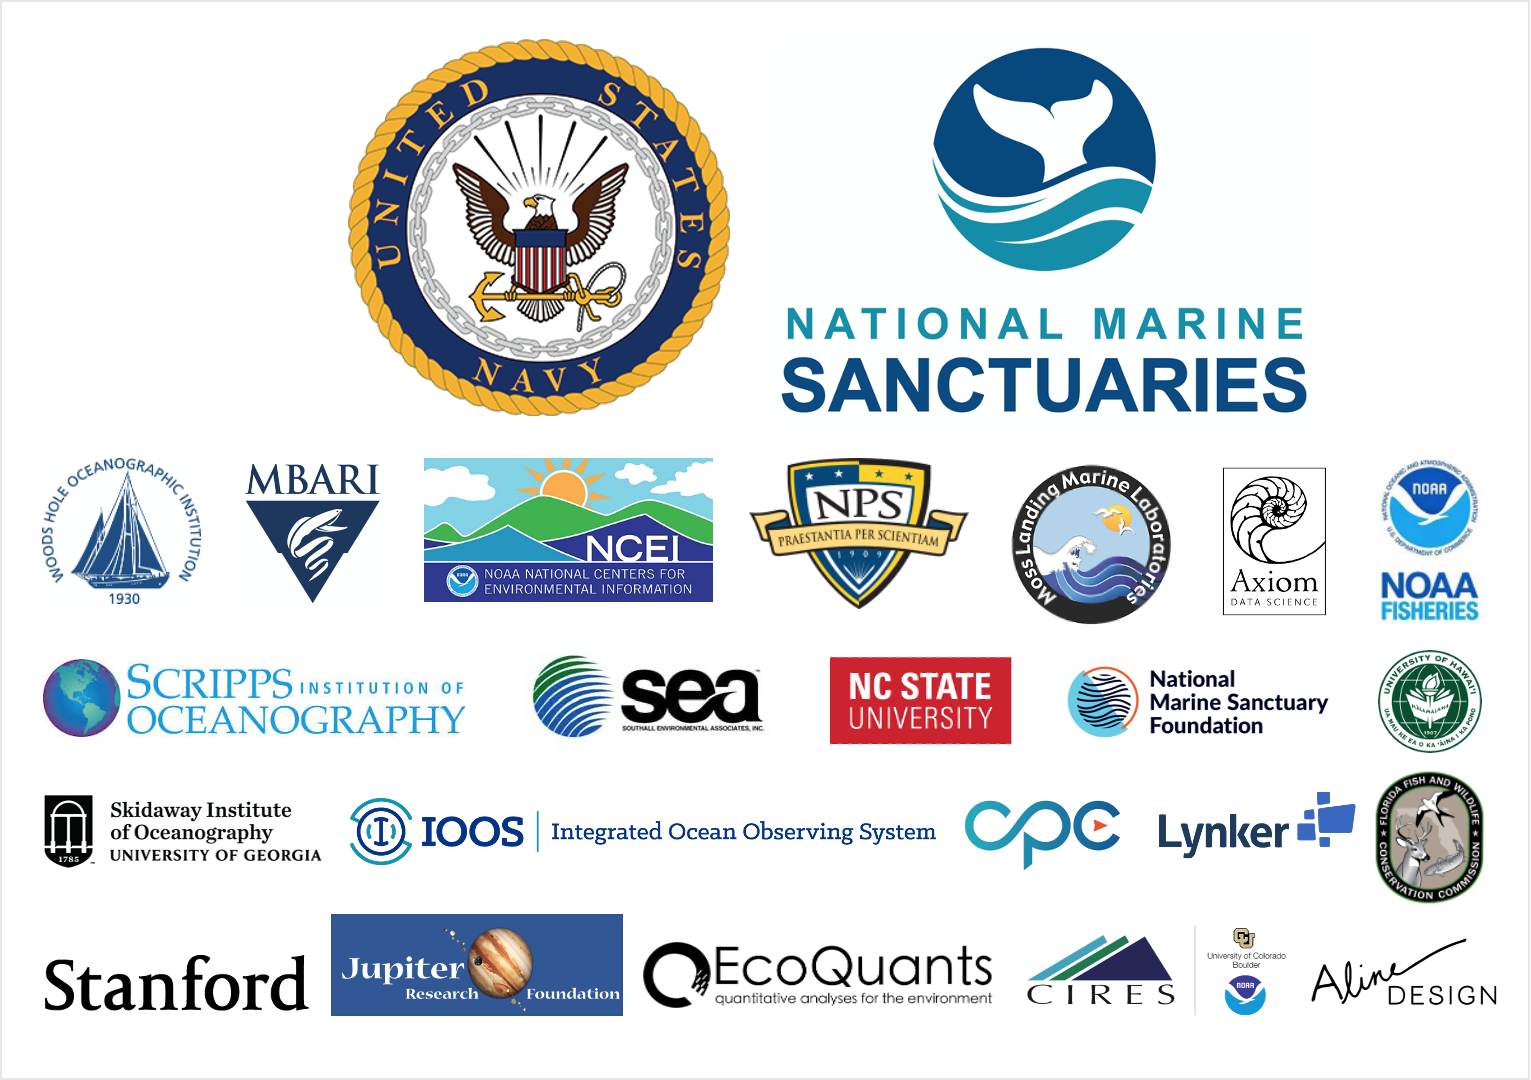 This image shows the logos for the NOAA Office of National Marine Sanctuaries and U.S. Navy, along with 23 additional institutional logos representing the large team of people who support the SanctSound monitoring project’s data collection, analysis, archive, and product distribution. 